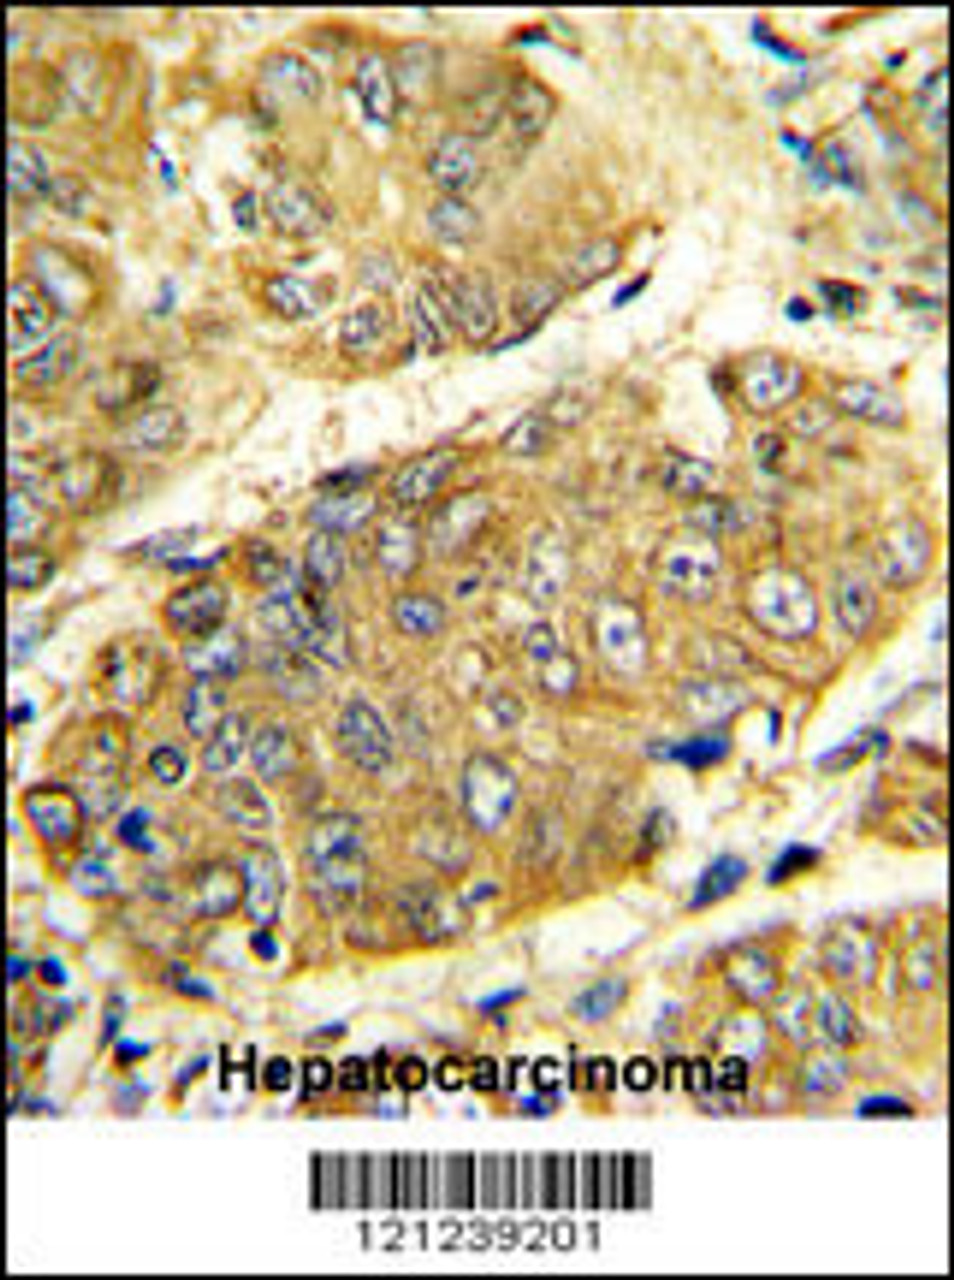 Formalin-fixed and paraffin-embedded human hepatocarcinoma reacted with LTA Antibody, which was peroxidase-conjugated to the secondary antibody, followed by DAB staining.